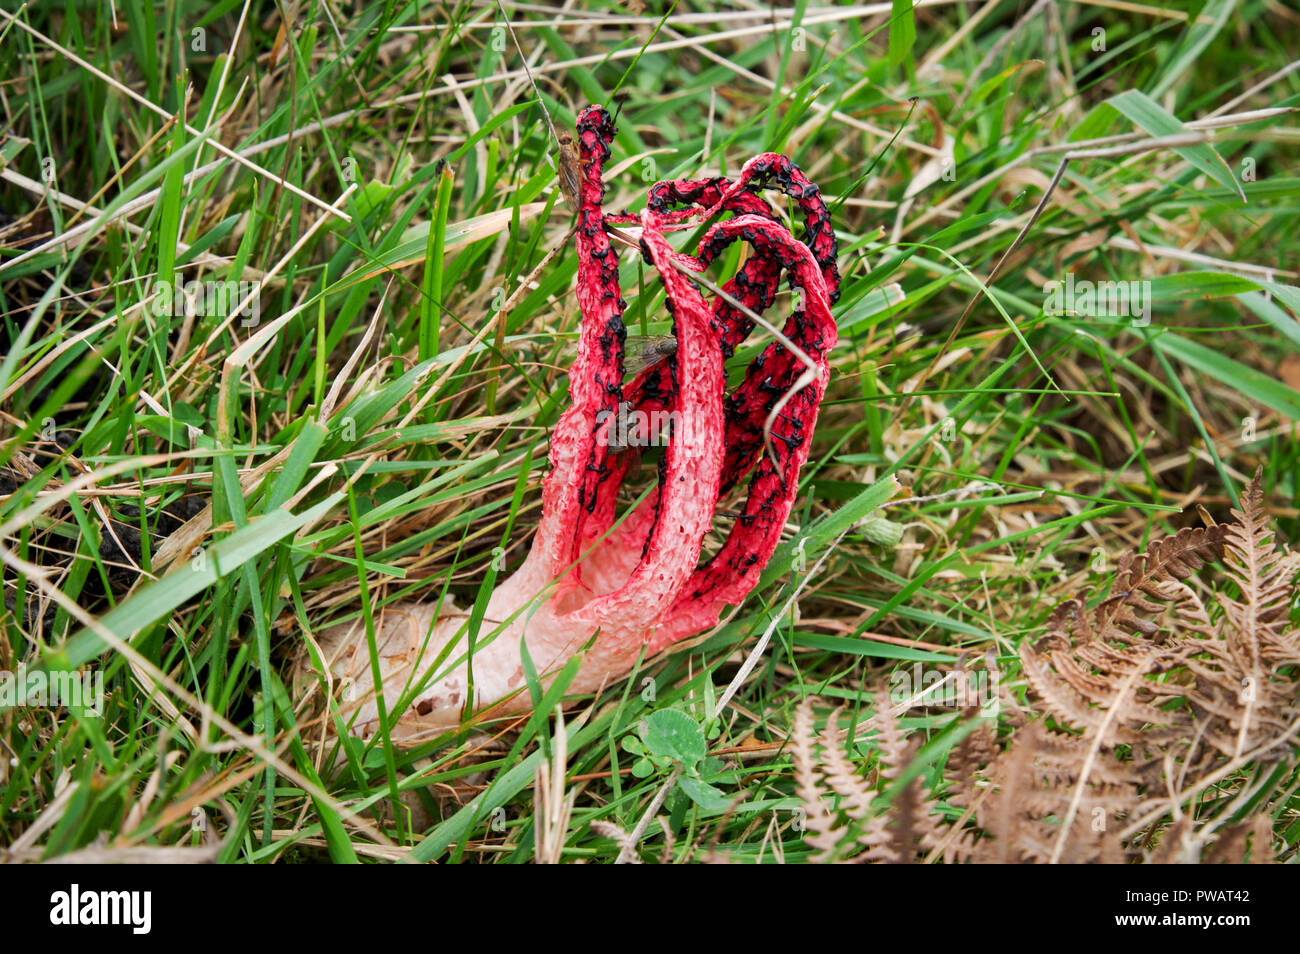 Octopus stinkhorn (Clathrus archeri) mushroom growing in Chailey Common Nature Reserve, Sussex Stock Photo